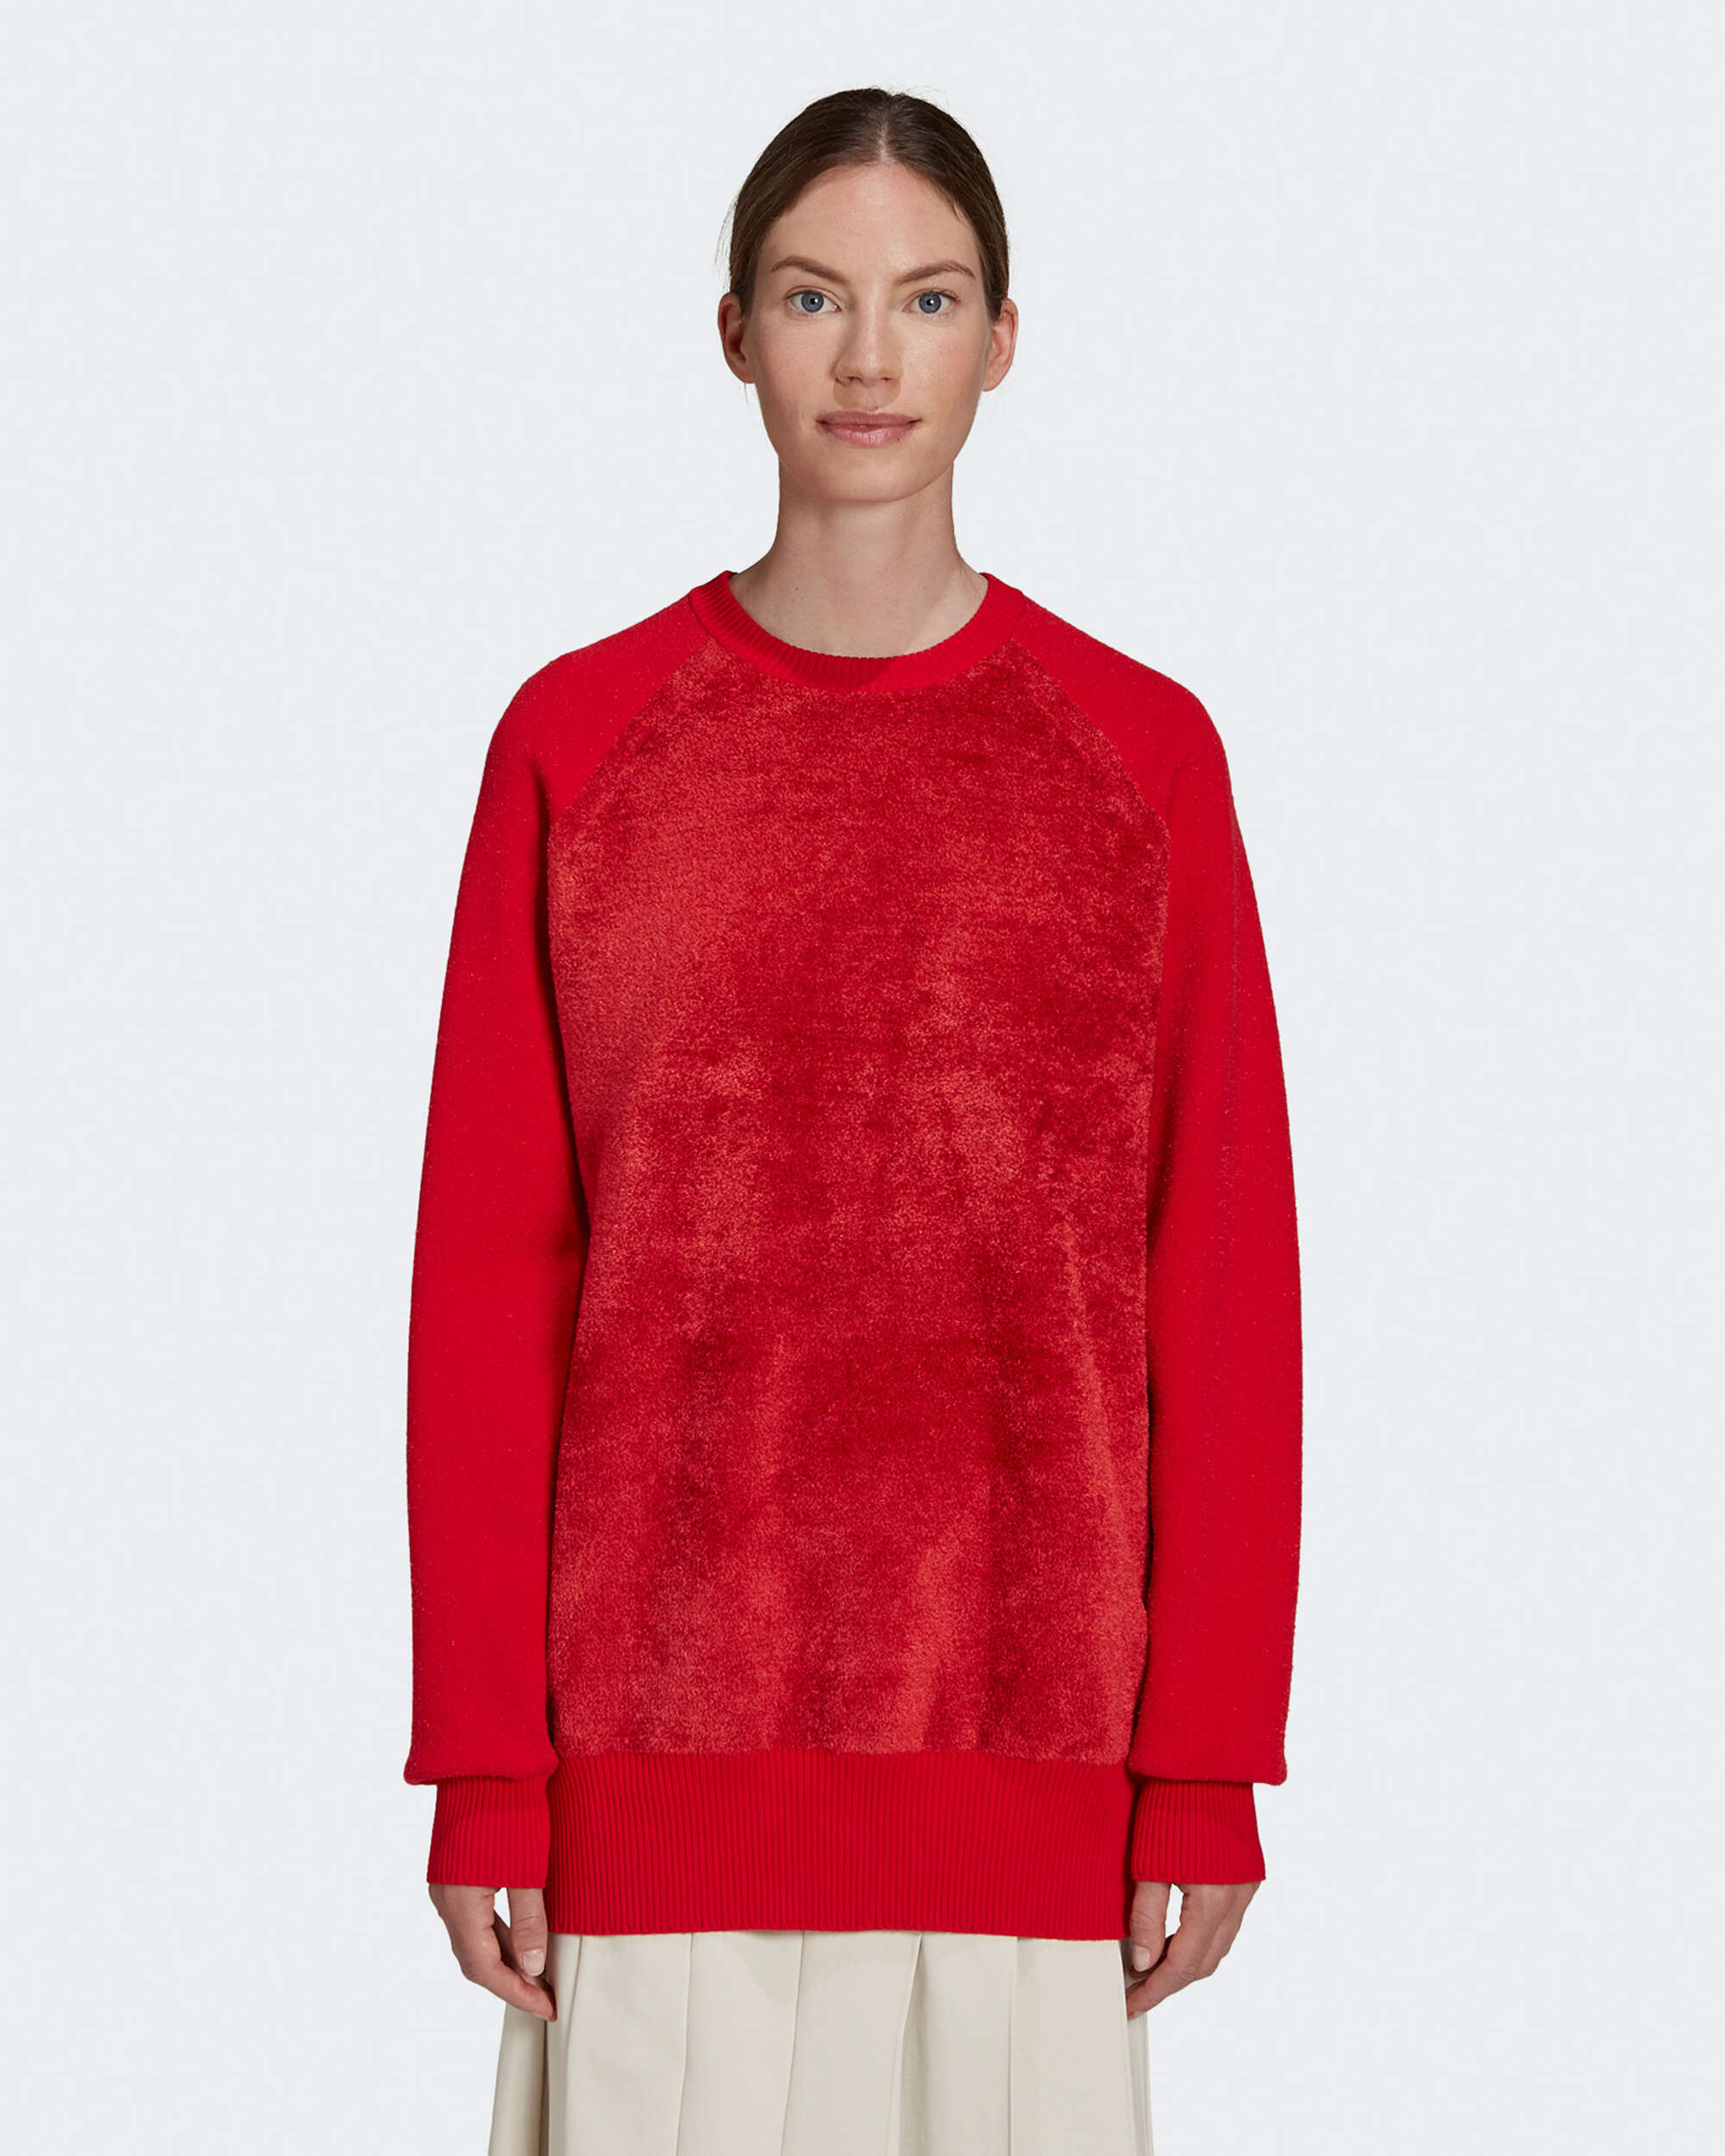 Sweaters & Sweatshirts, Velvet Wool Knitted Pullover